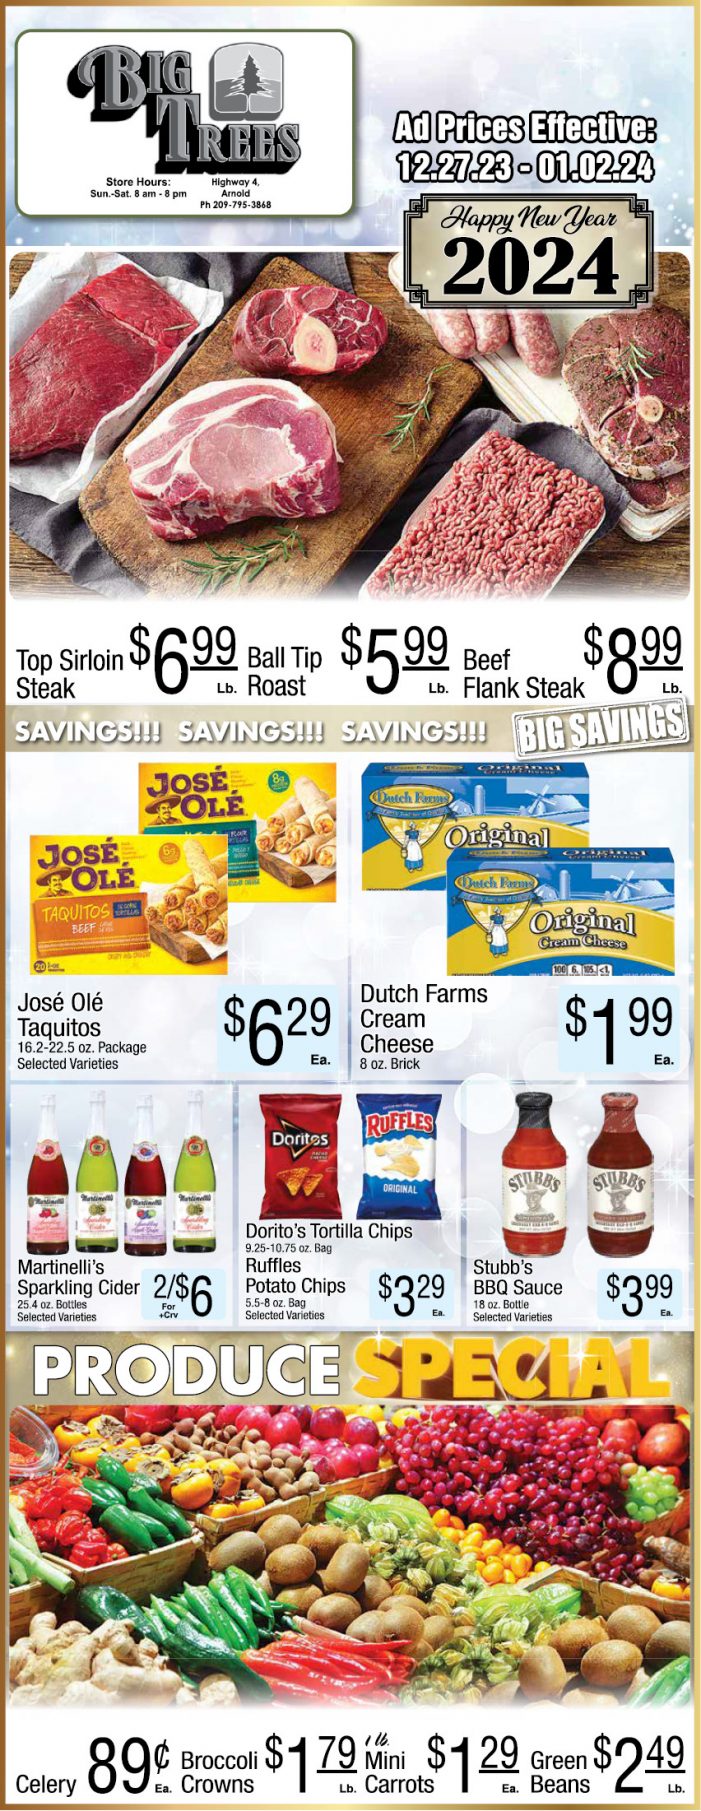 Big Trees Market Big New Years Ad, Grocery, Produce, Meat & Deli Specials Through January 2nd! Shop Local & Save!